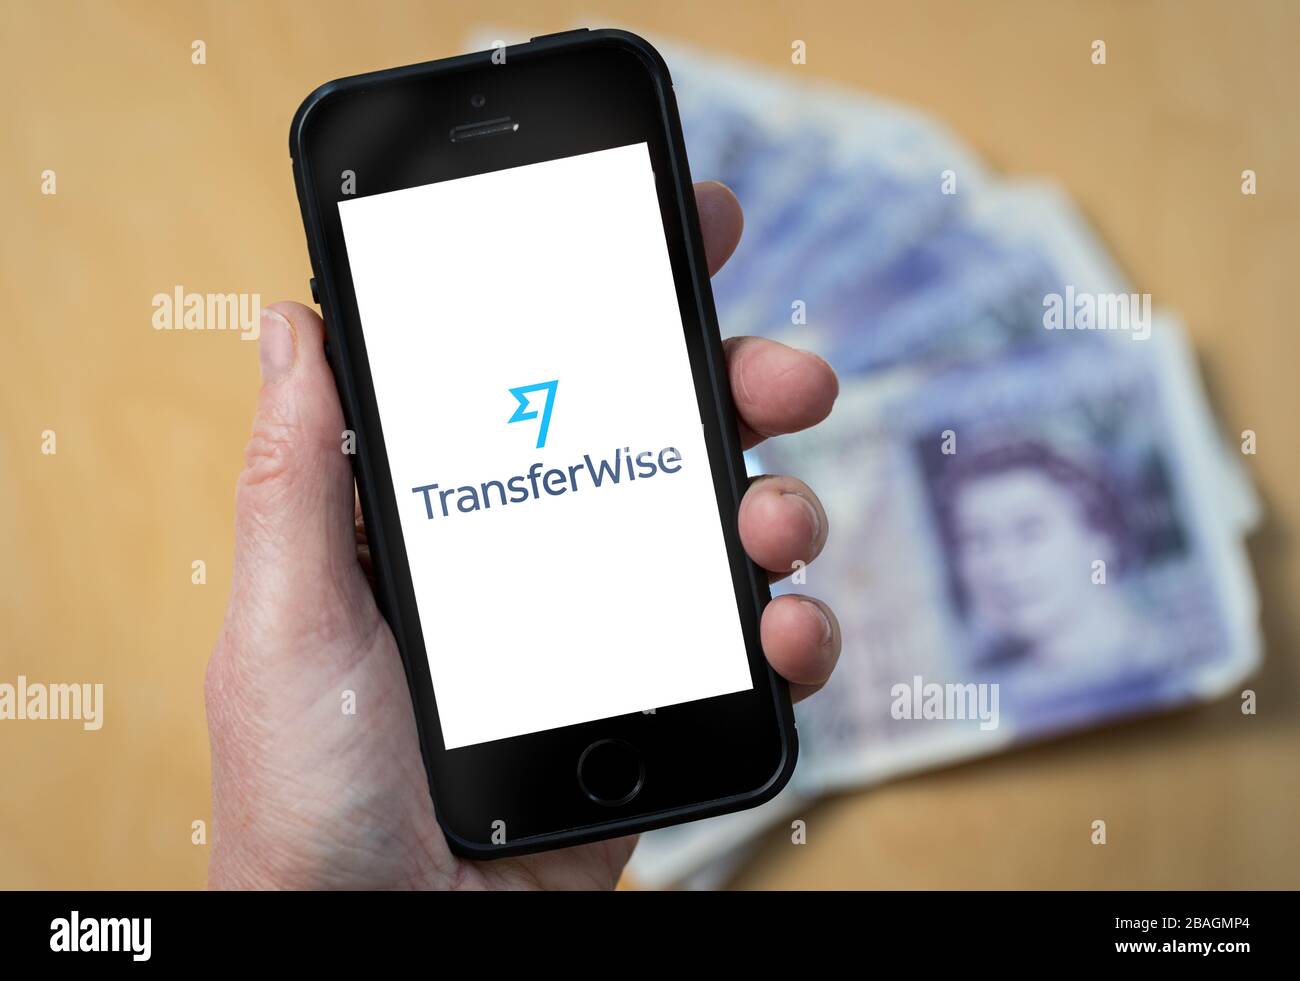 A woman looking at the TransferWise money transfer company logo on a mobile phone. (editorial Use Only) Stock Photo